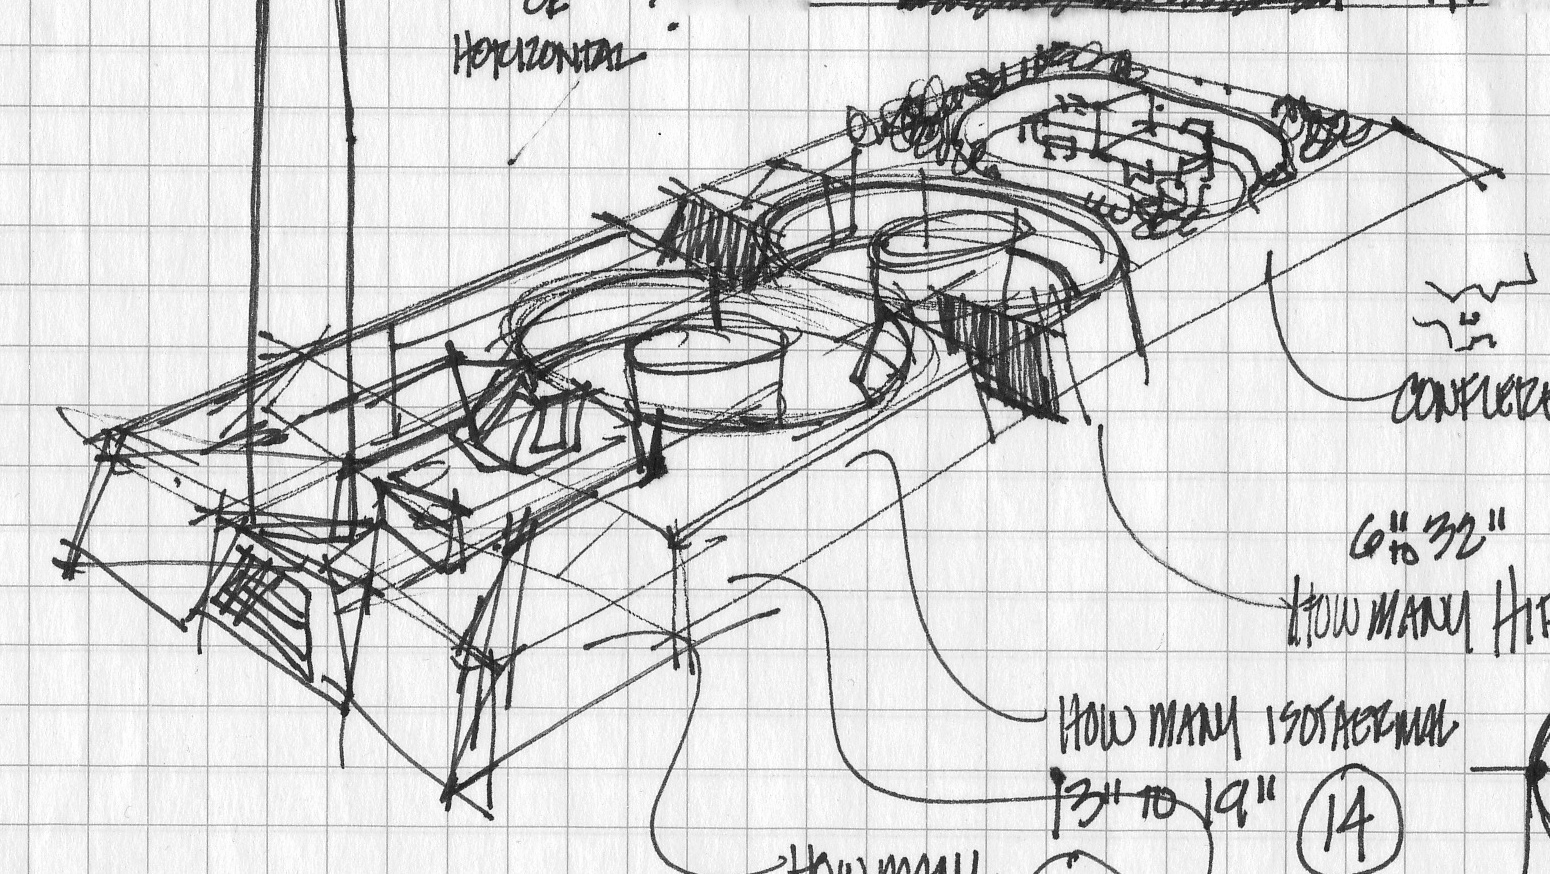 First sketch of the exhibit plan, shown above and at a diagonal.